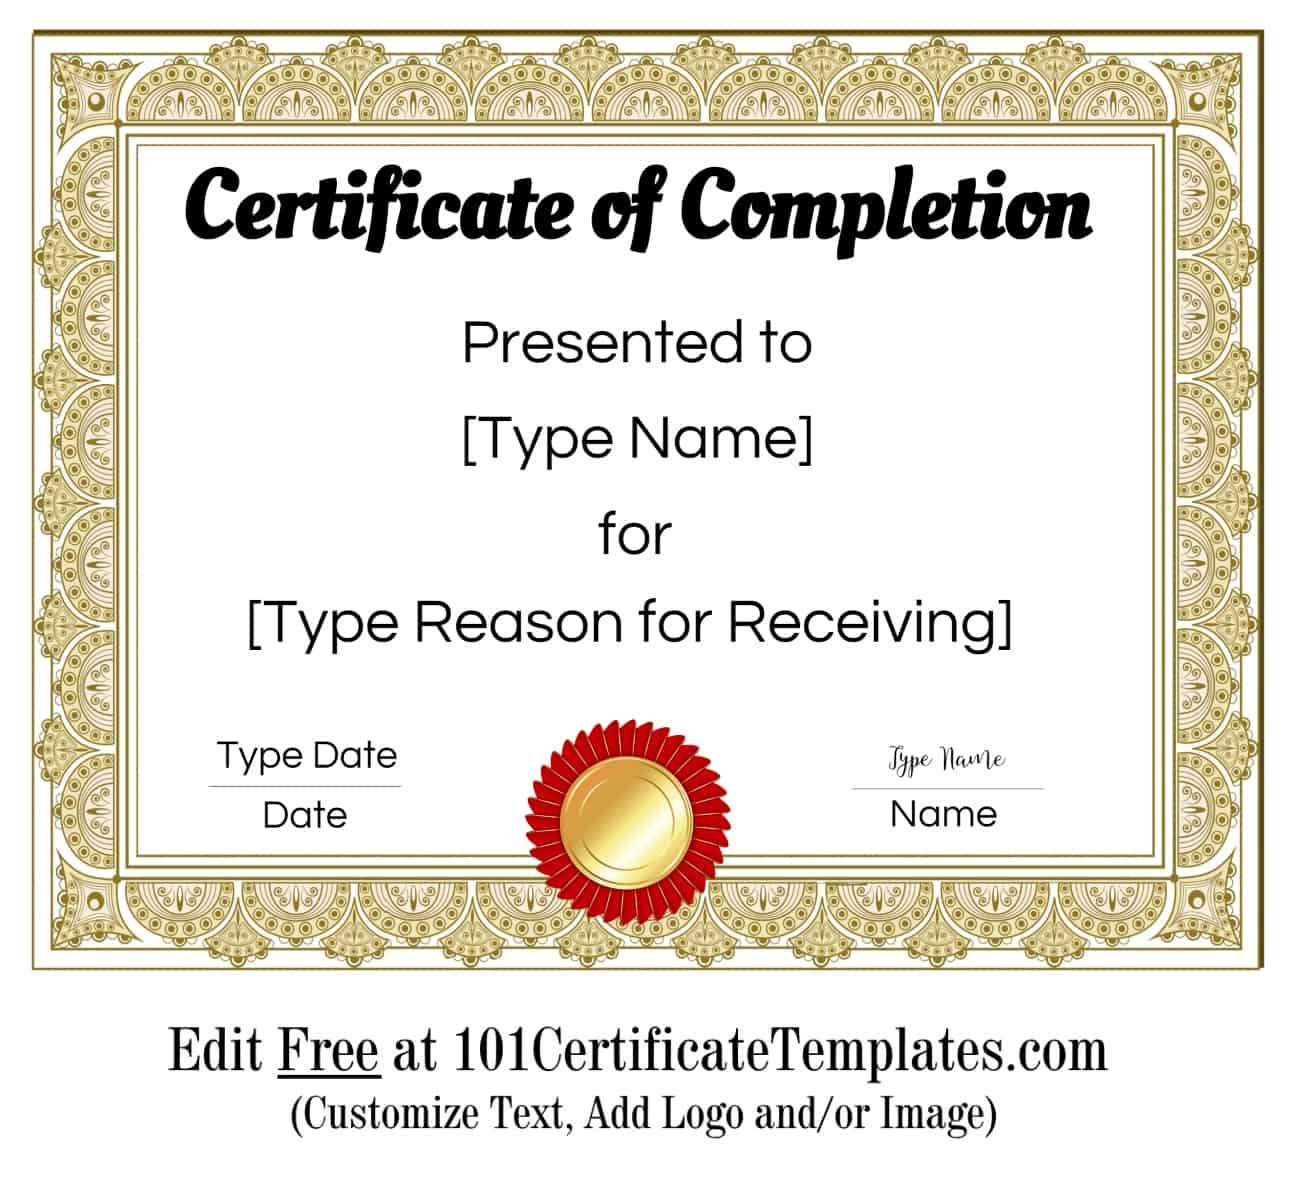 Free Certificate Of Completion  Customize Online Then Print pertaining to Best Certificate Of Completion Template Free Printable